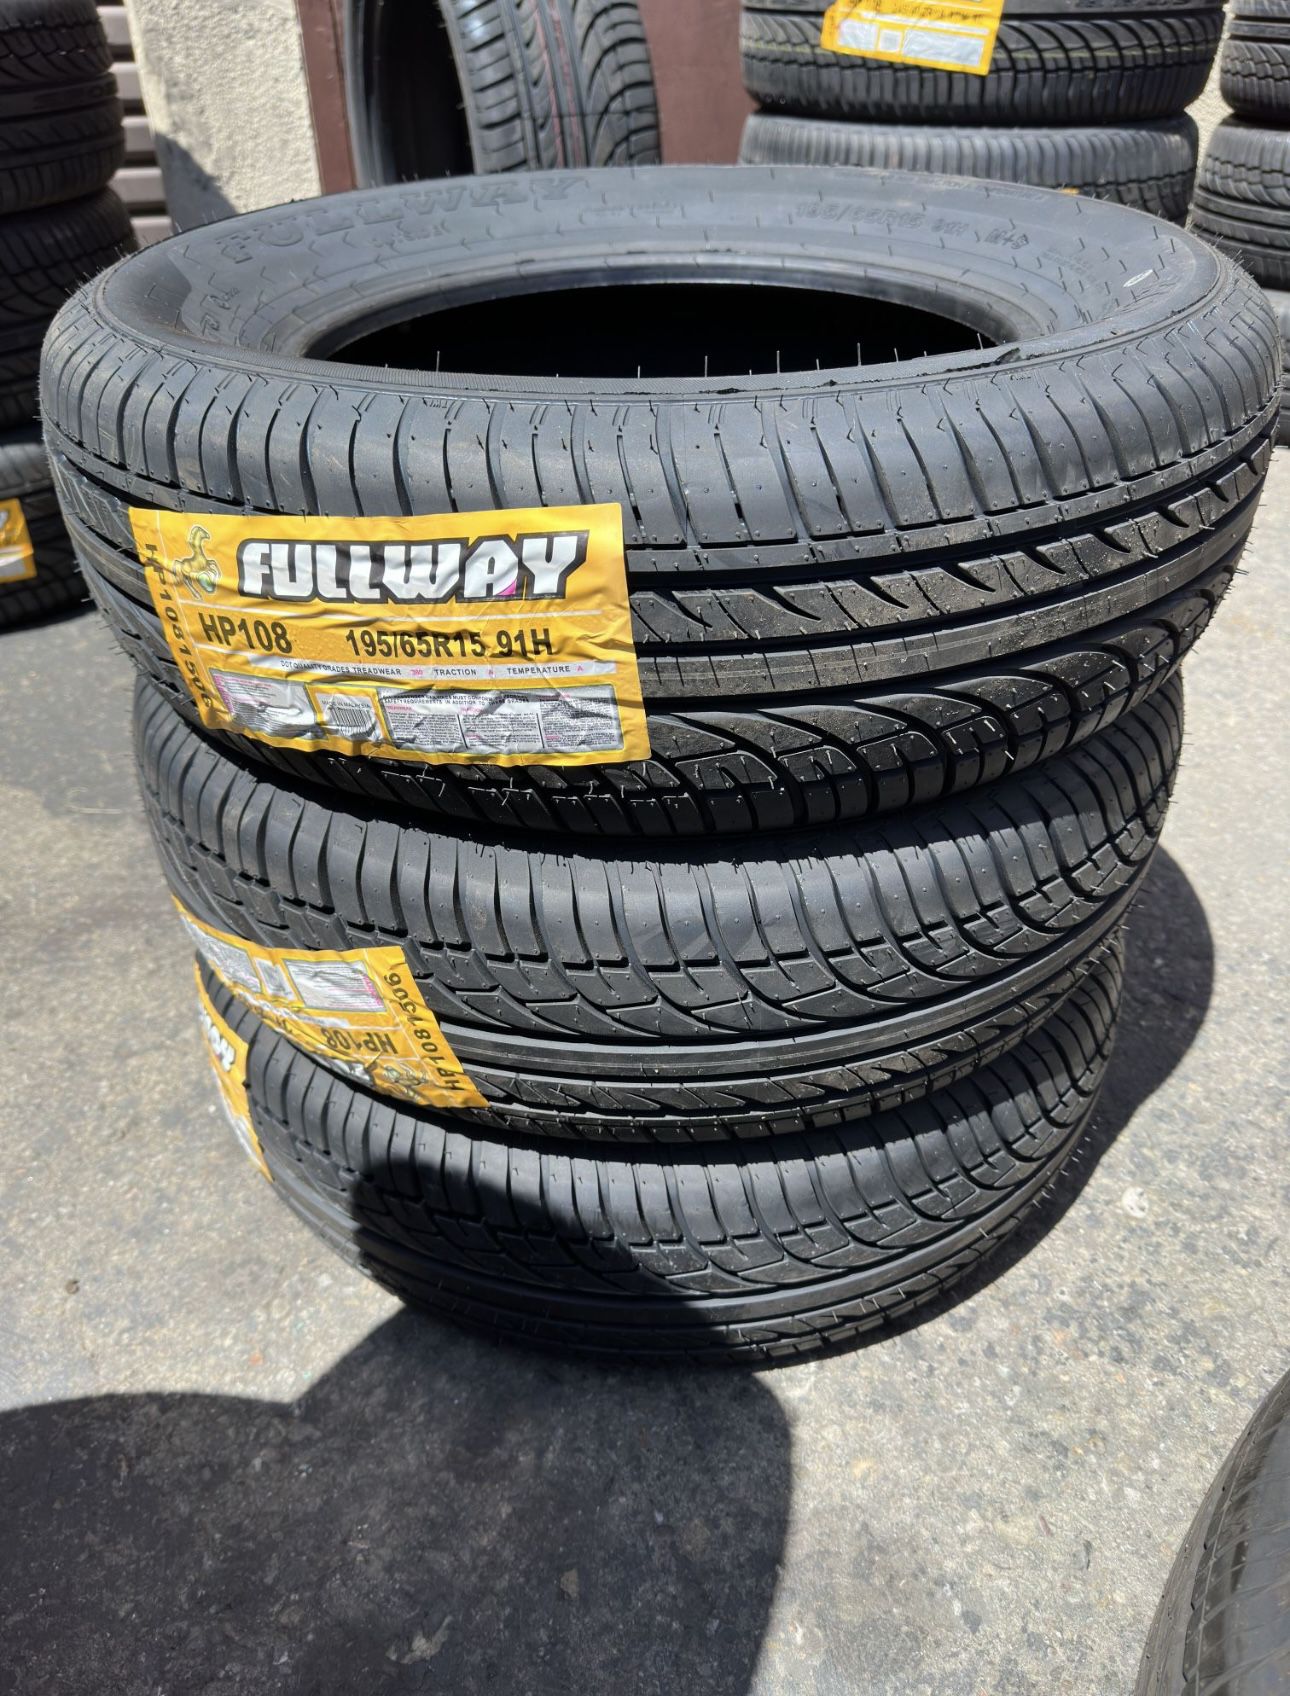 New Tire 195/65R15 Fullway HP108 91H Set Of 4 Tires Free Mount Balance installed